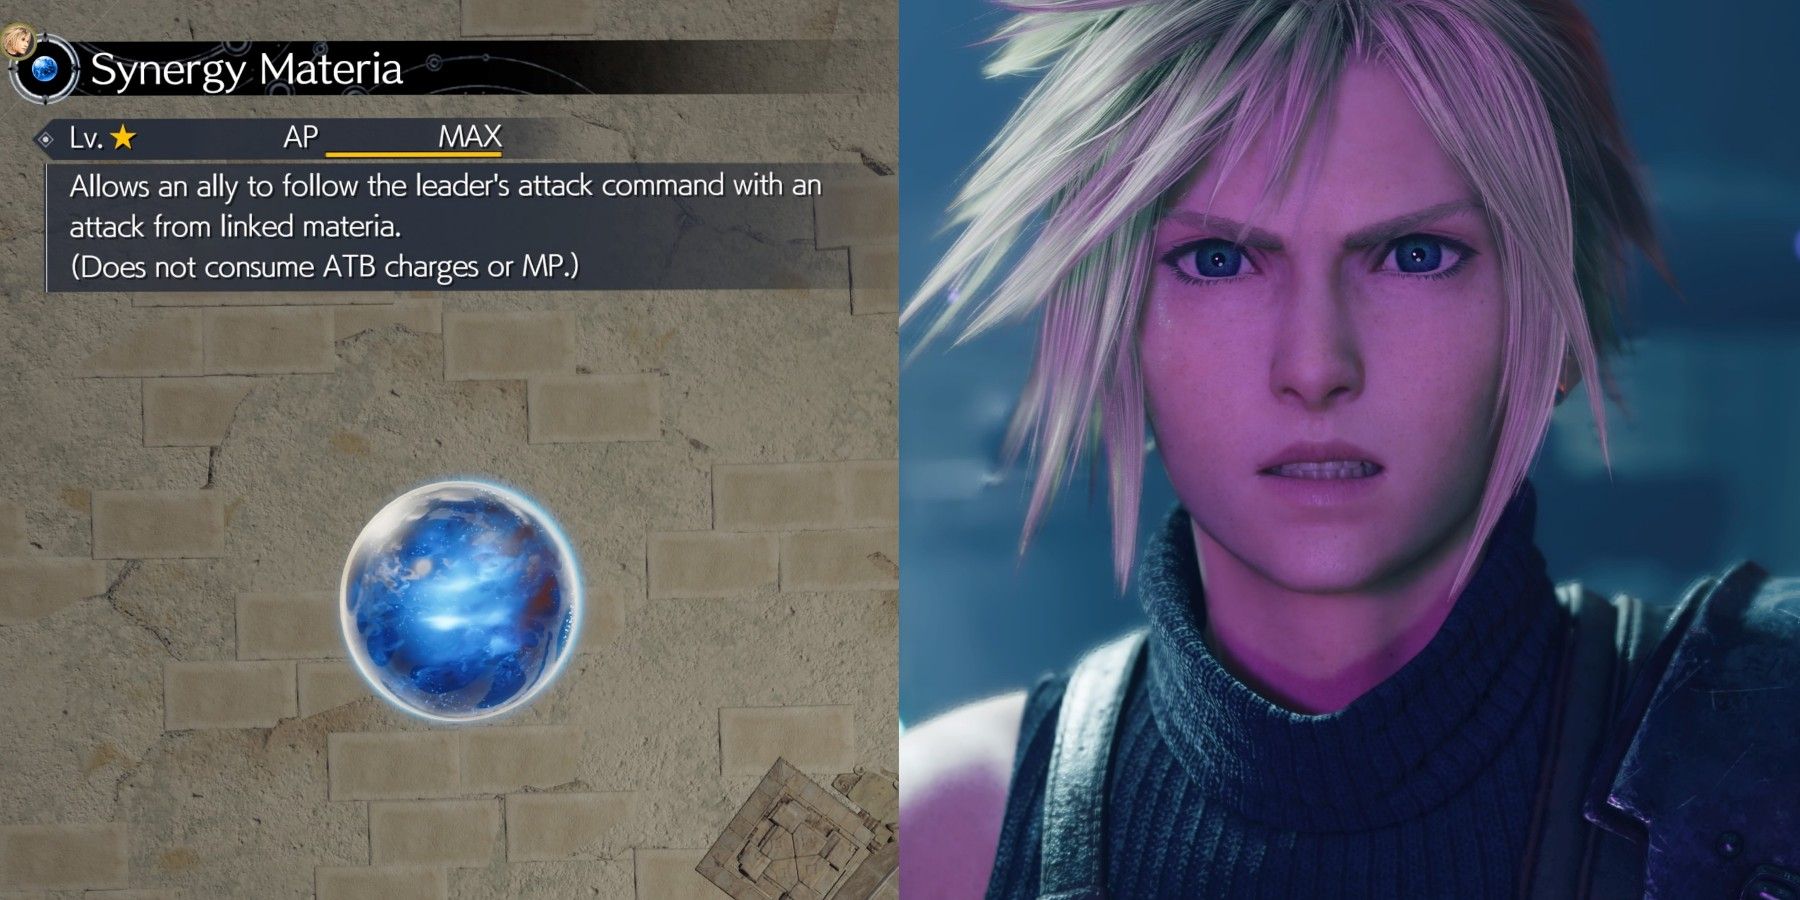 featured Final Final Fantasy 7 Rebirth Where To Find Synergy Materia (&How To Use It)